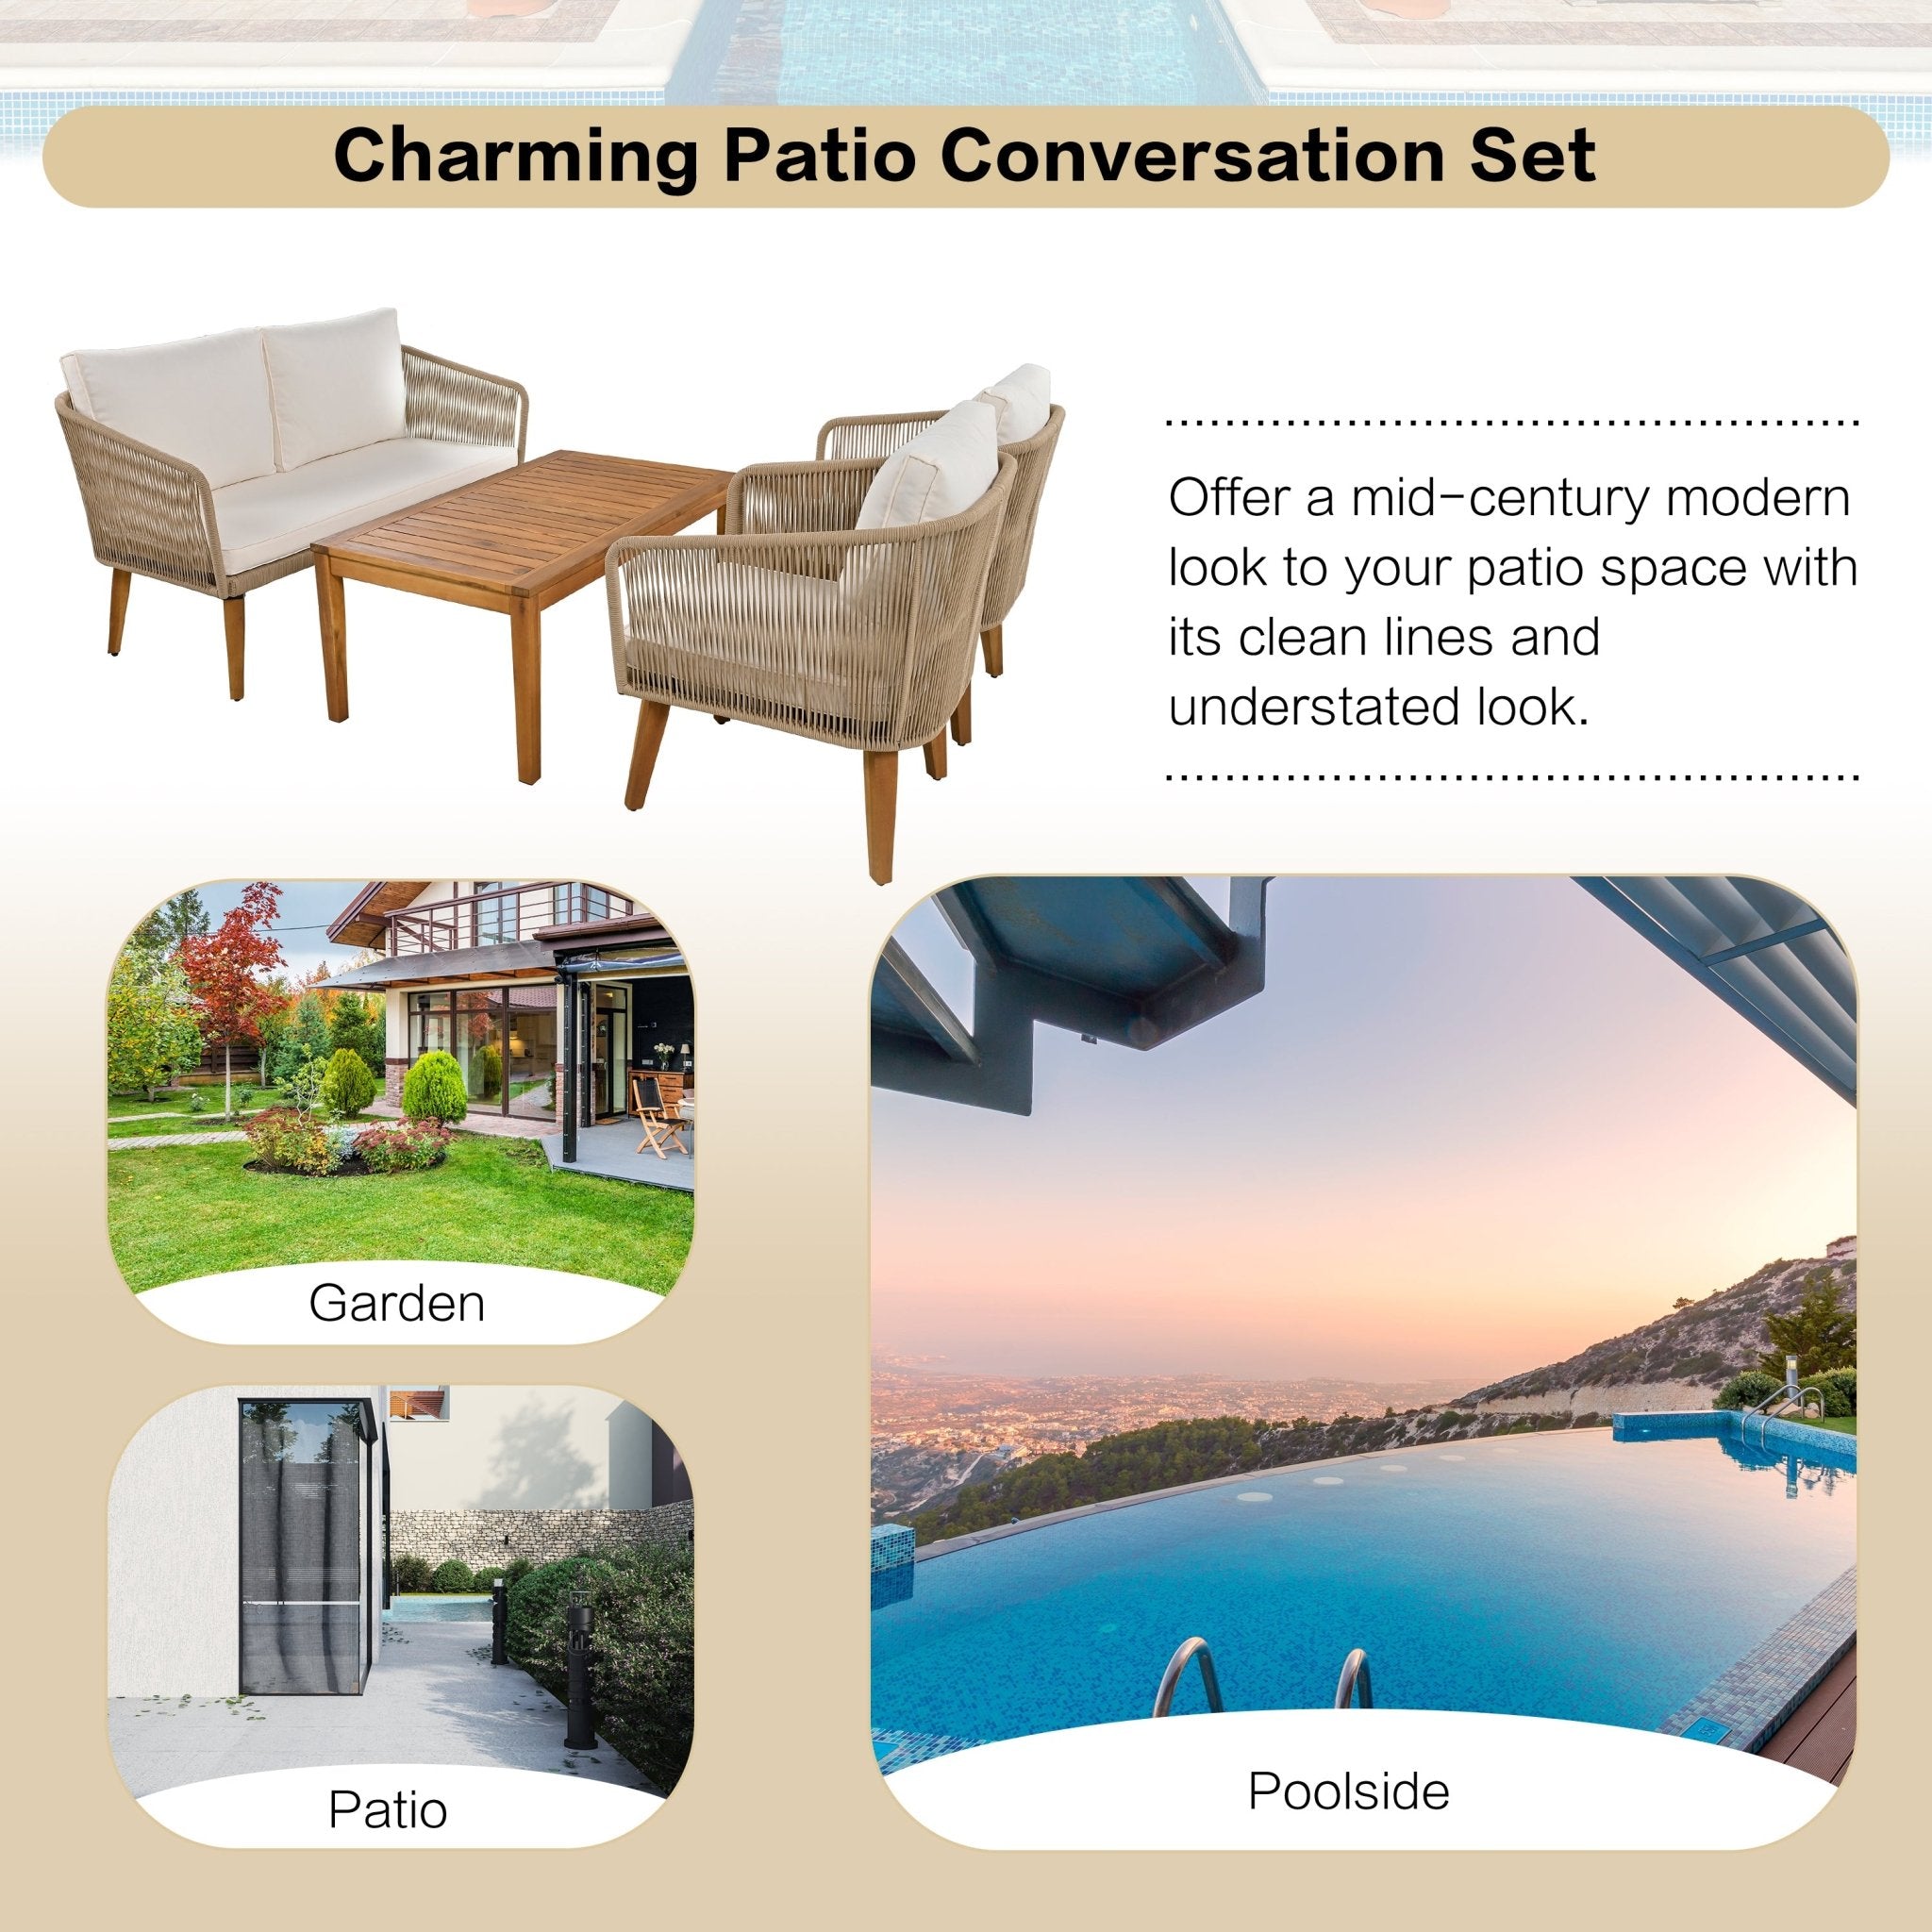 4-Piece Outdoor Conversation Set with Loveseat, Chairs and Table - Outdoor Seating